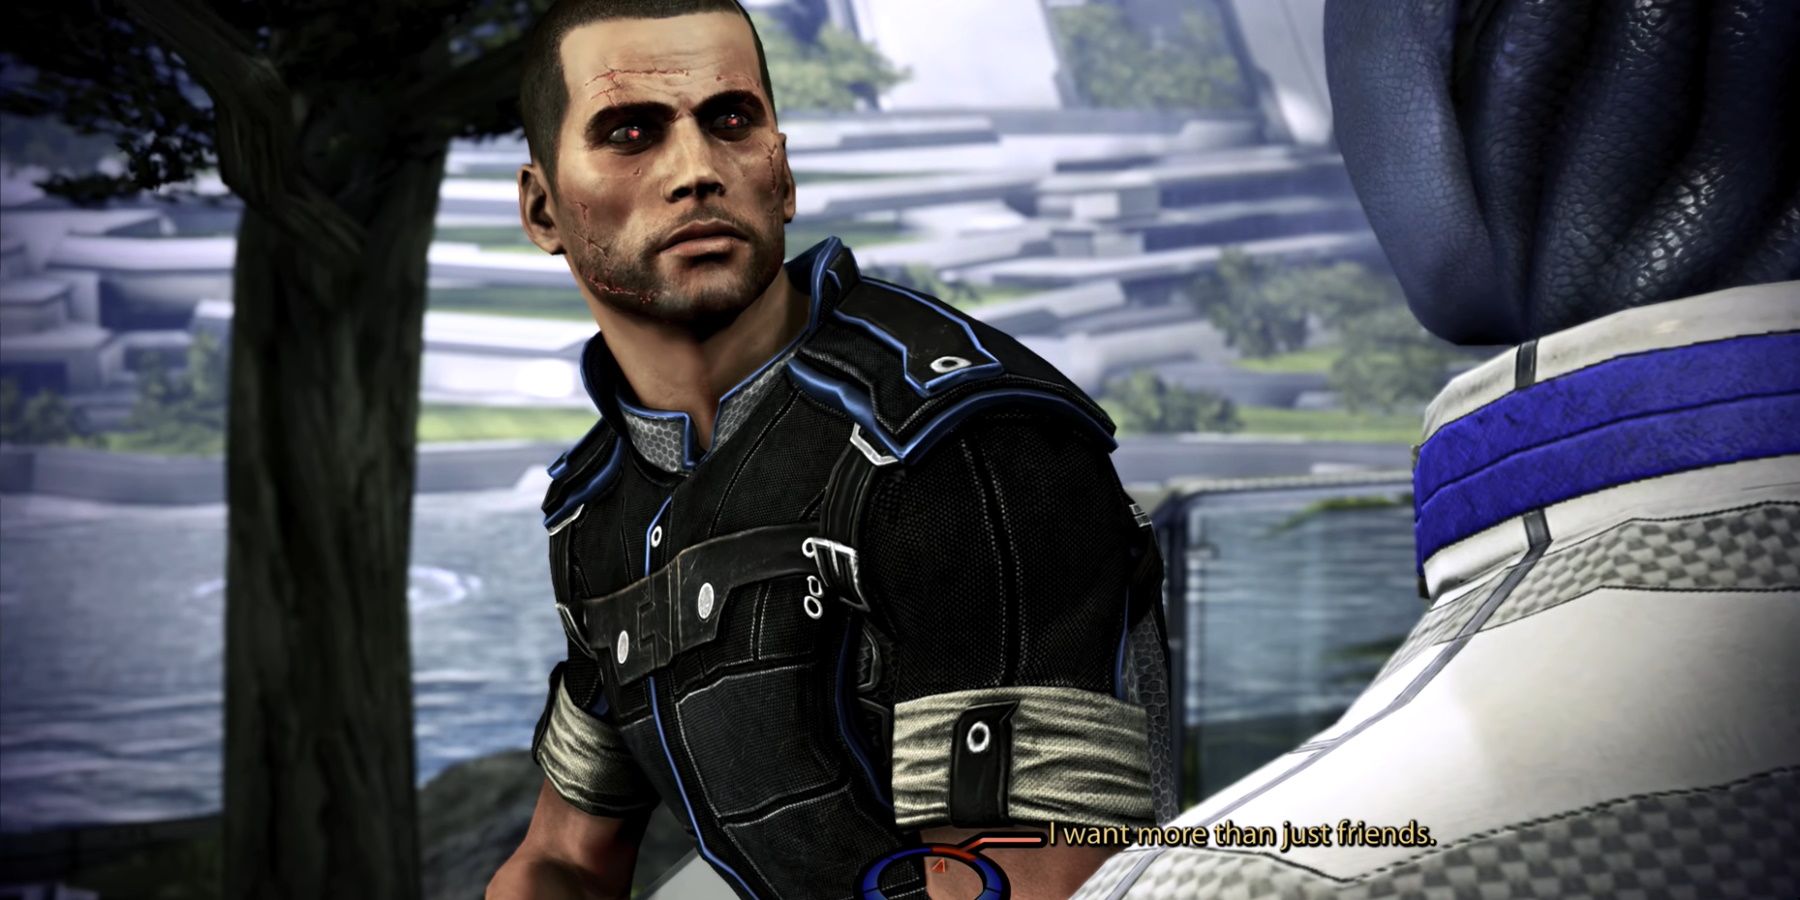 Renegade Male Shepard speaking with Liara in Mass Effect 3